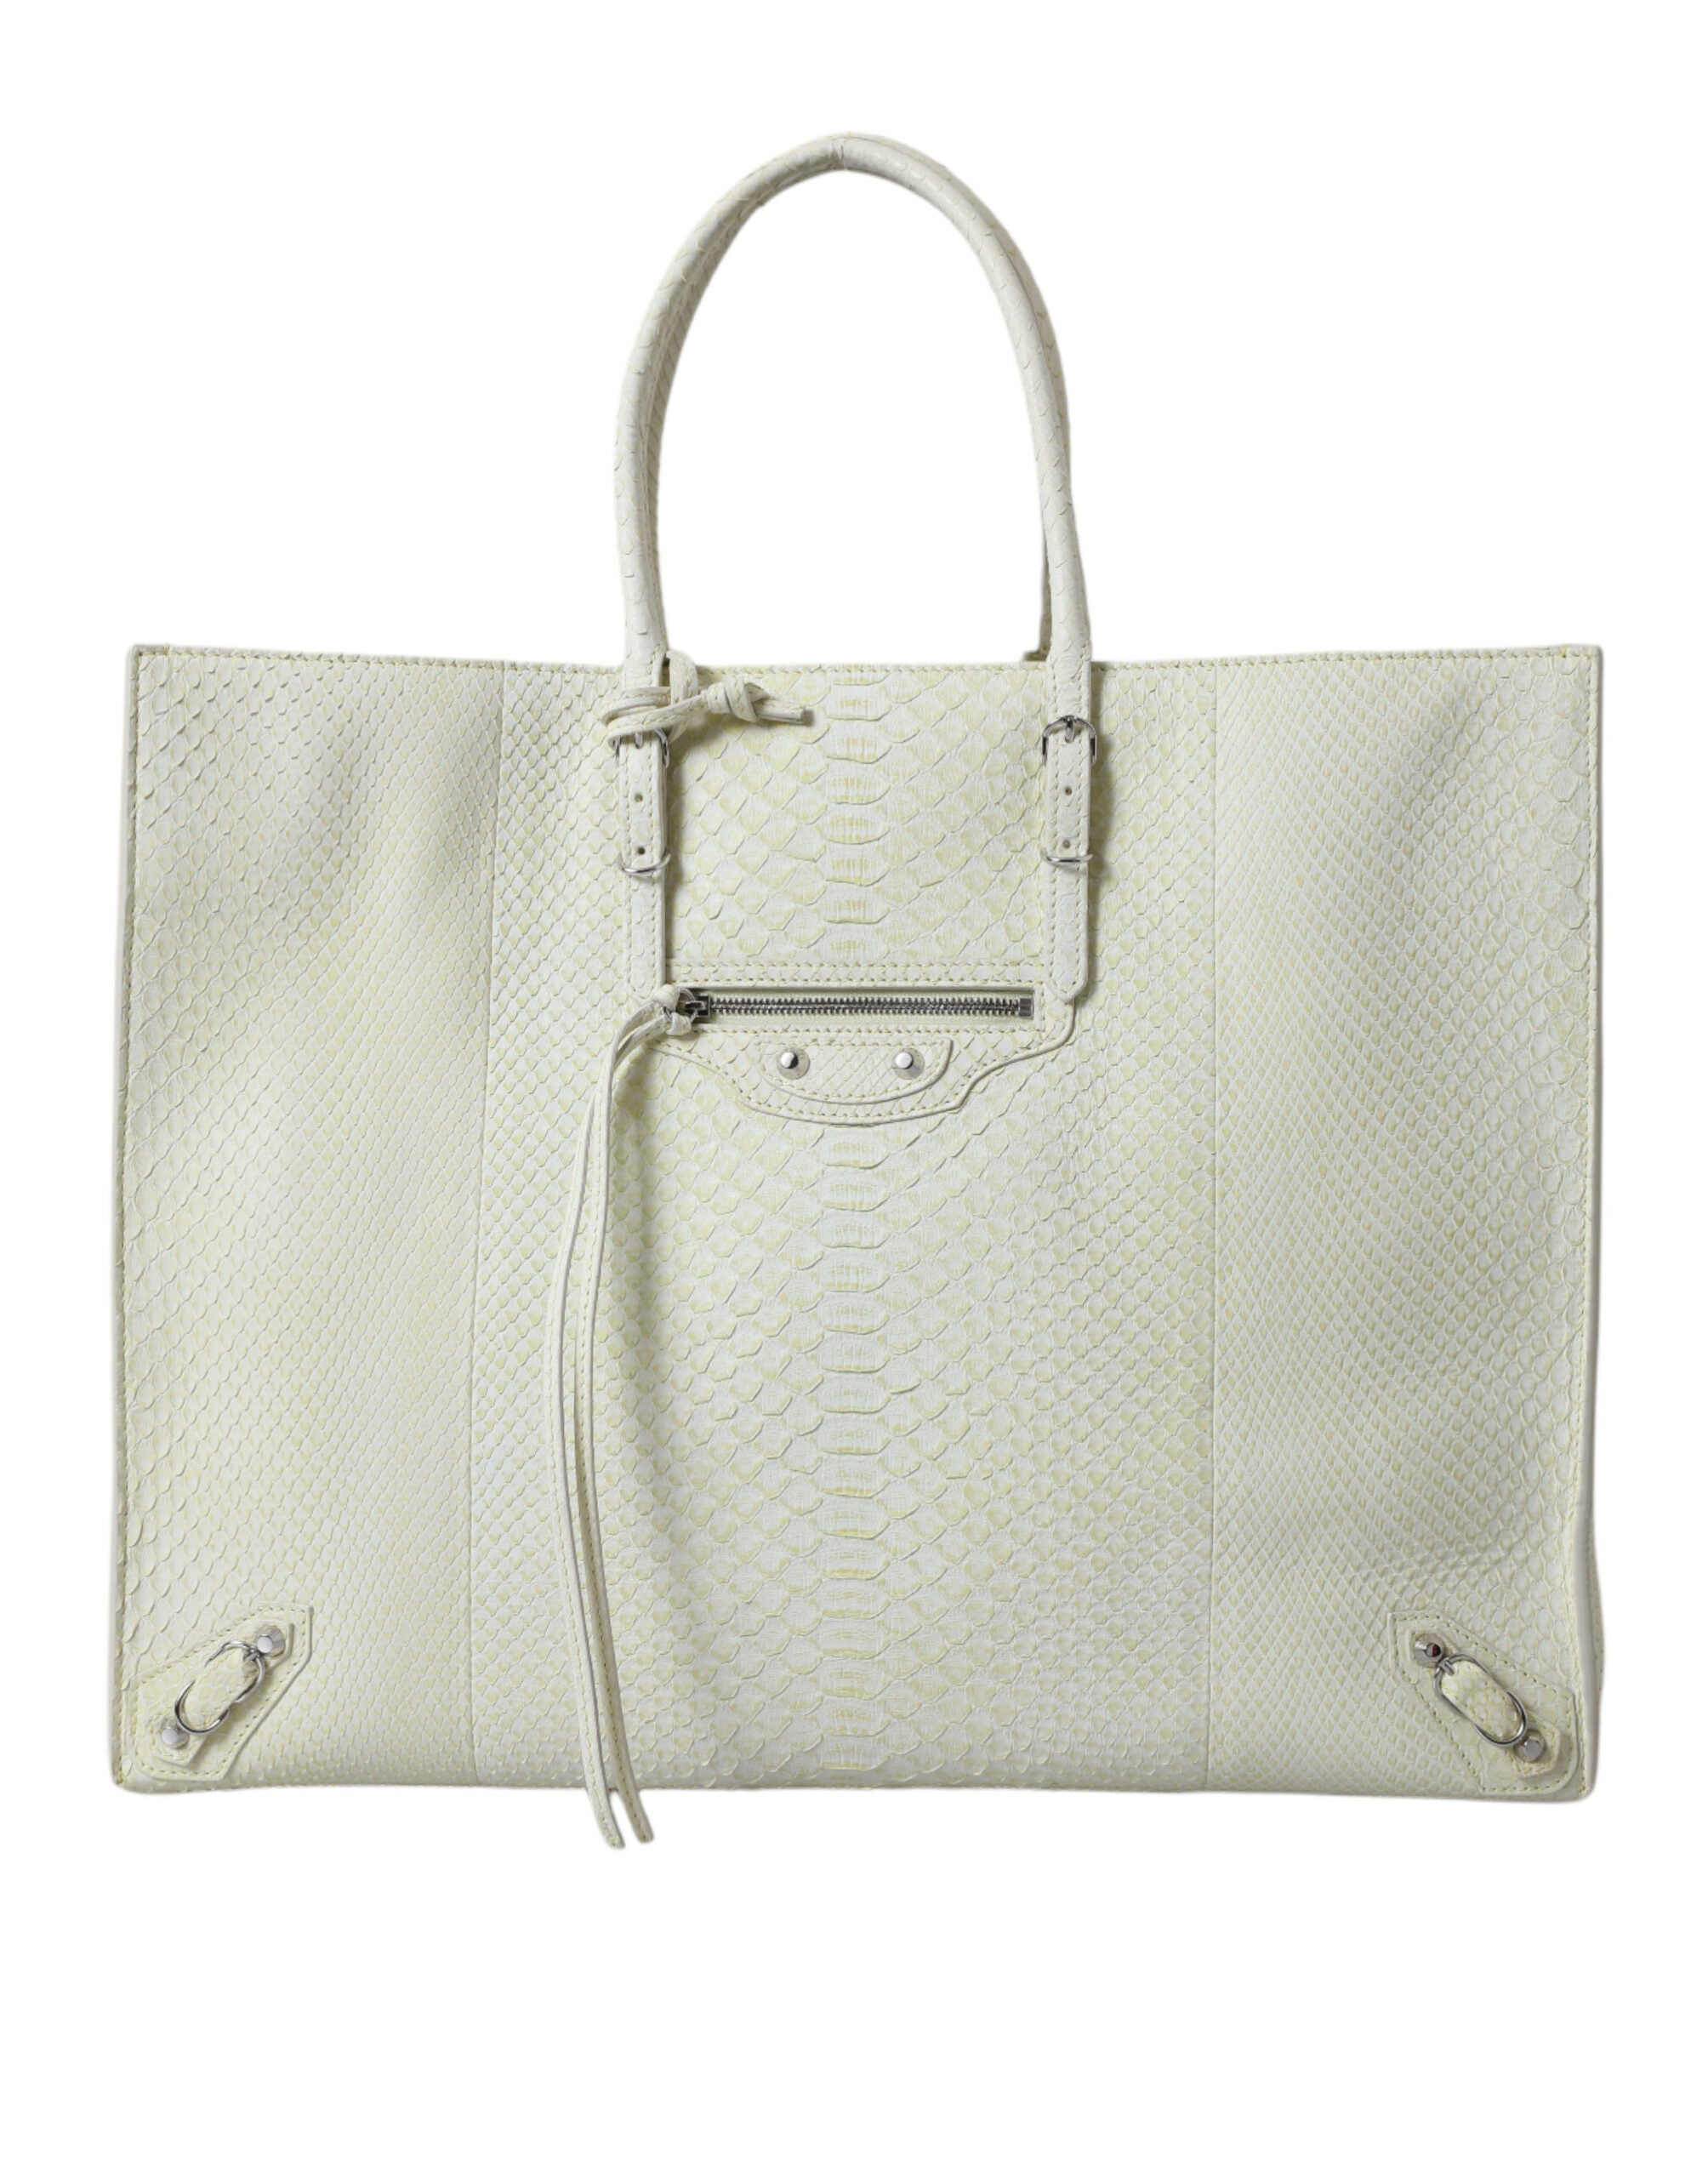 Chic Python Leather Tote in White & Yellow